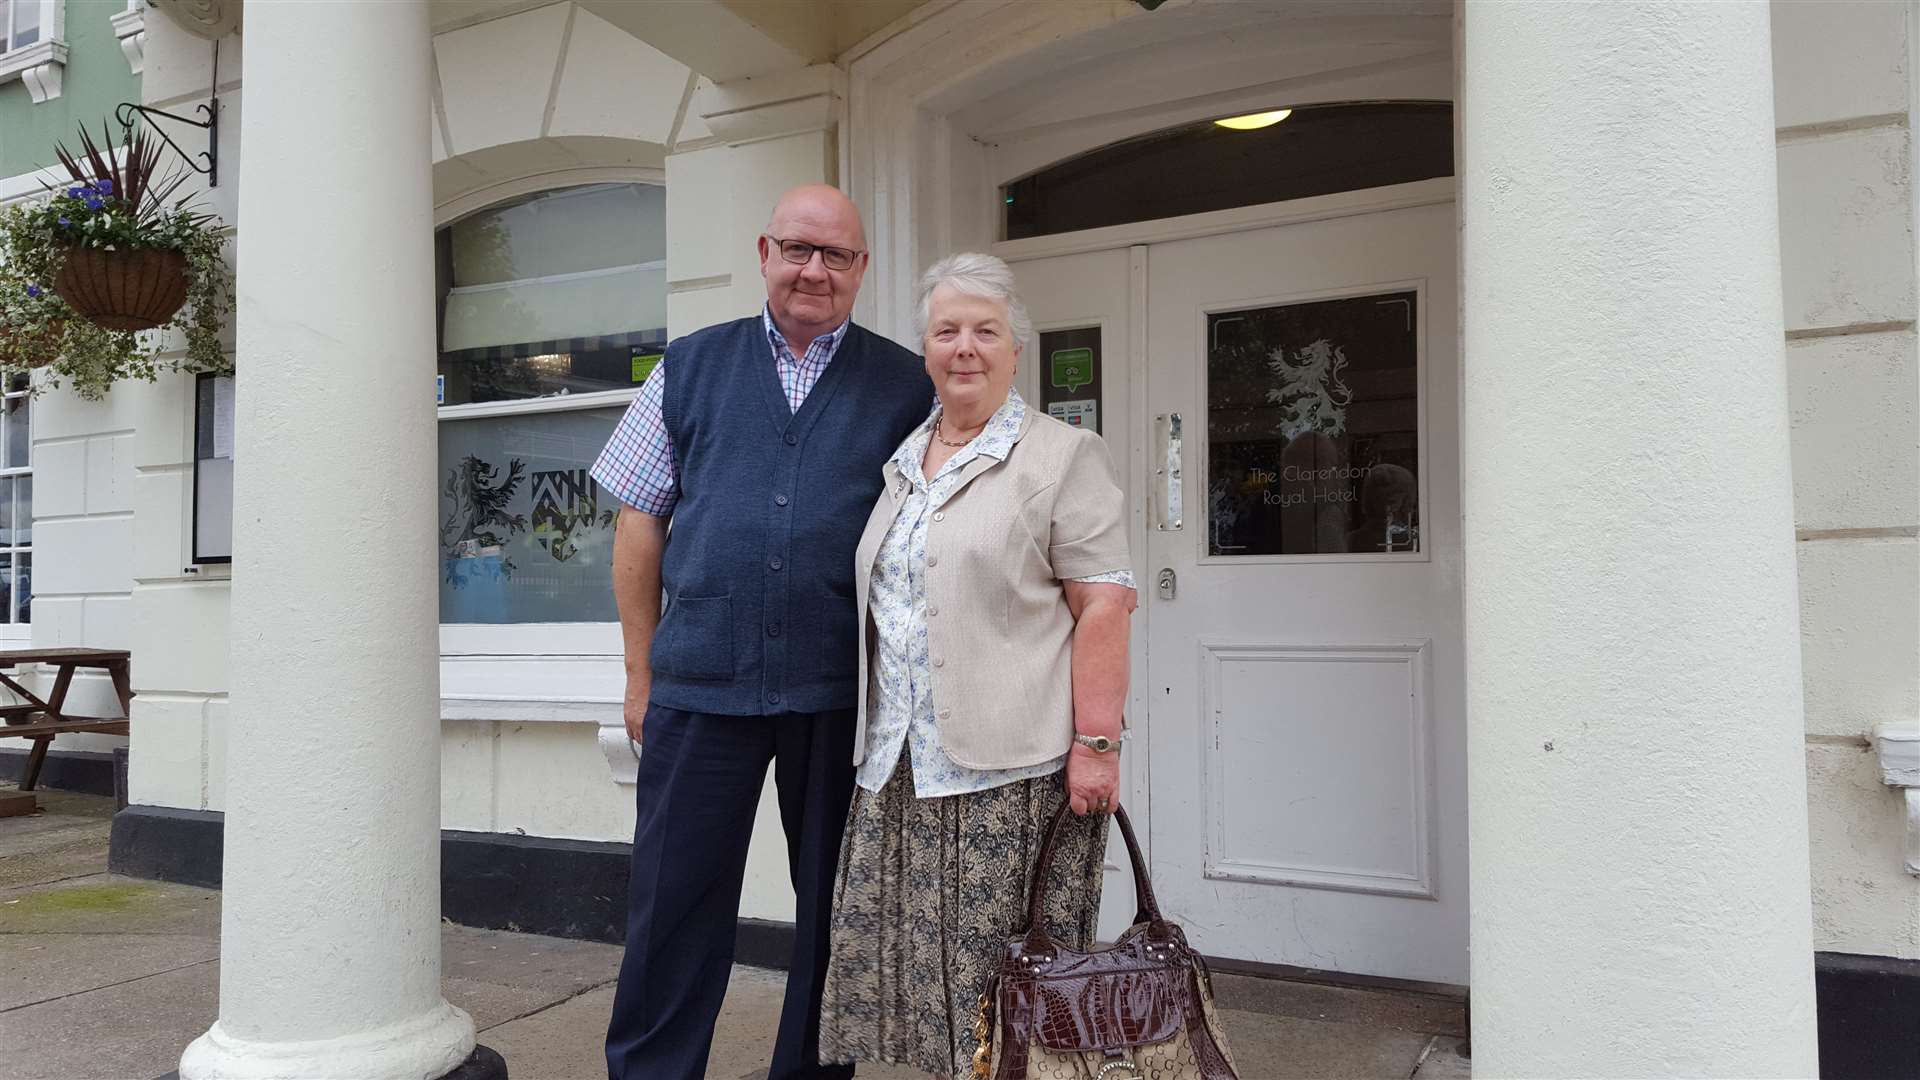 Derek and Gloria Shaw on a behind-the-scenes tour of the Gravesend Borough Market where they were both traders before it reopened in 2016